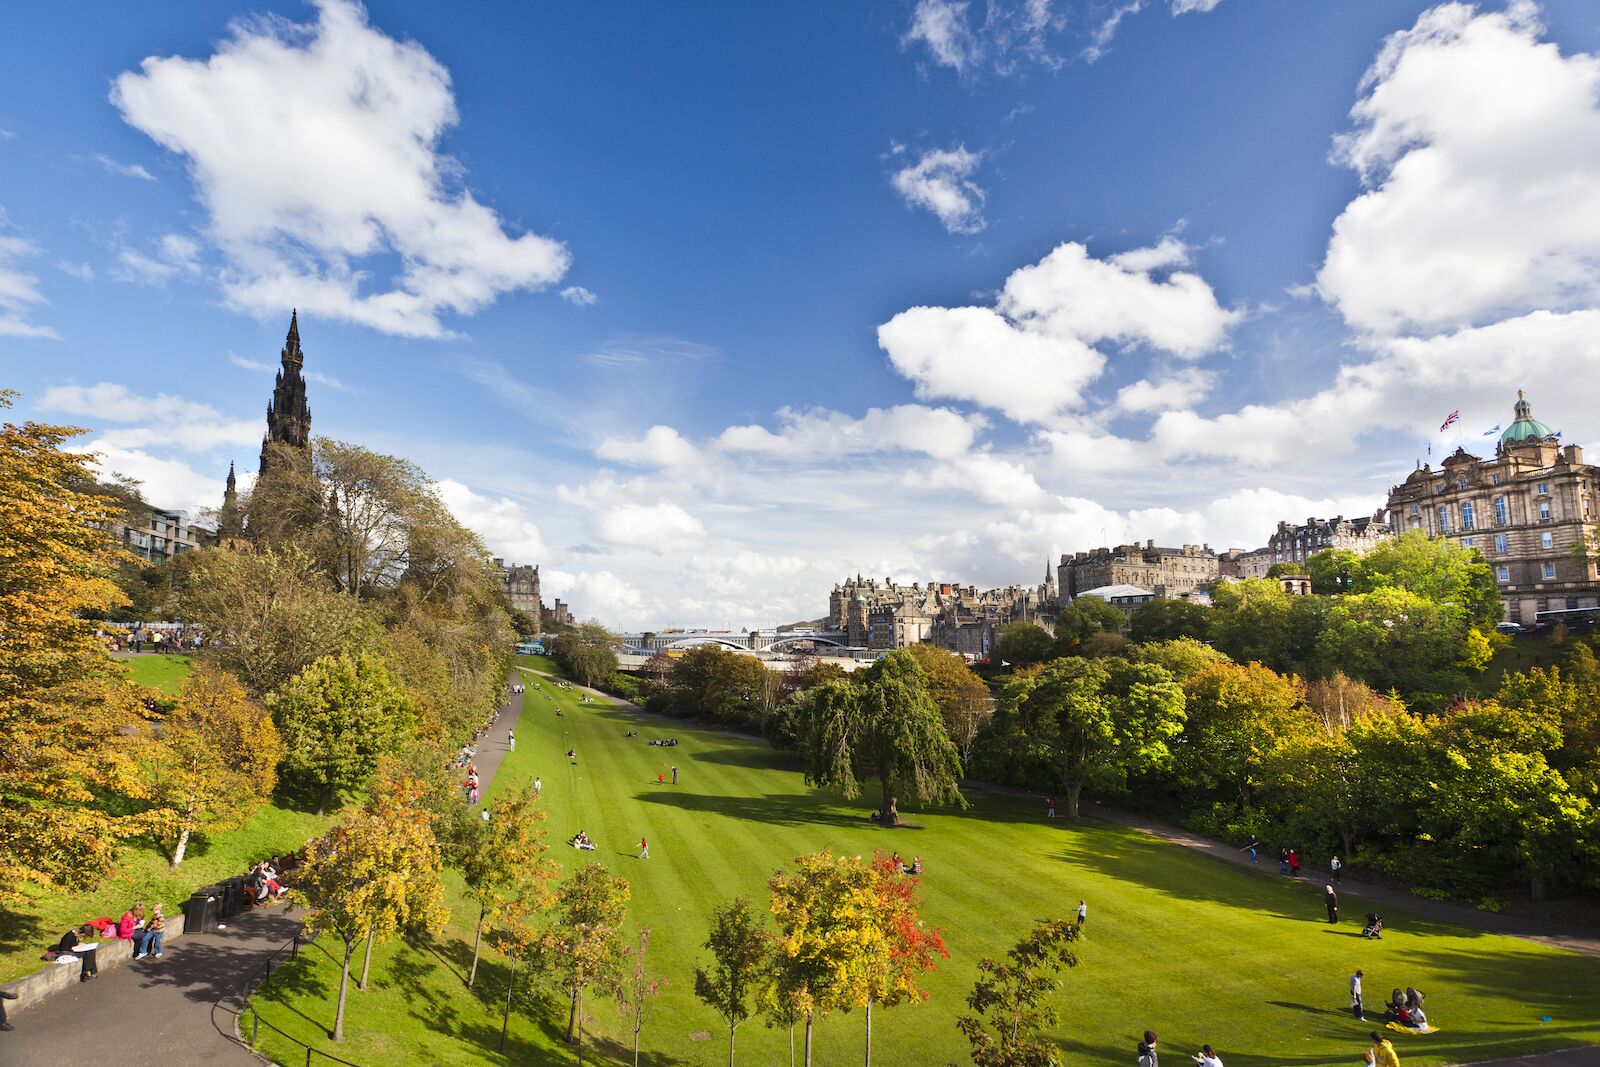 scariest places in Edinburgh: The Nor’ Loch known today as the Princes Street Gardens